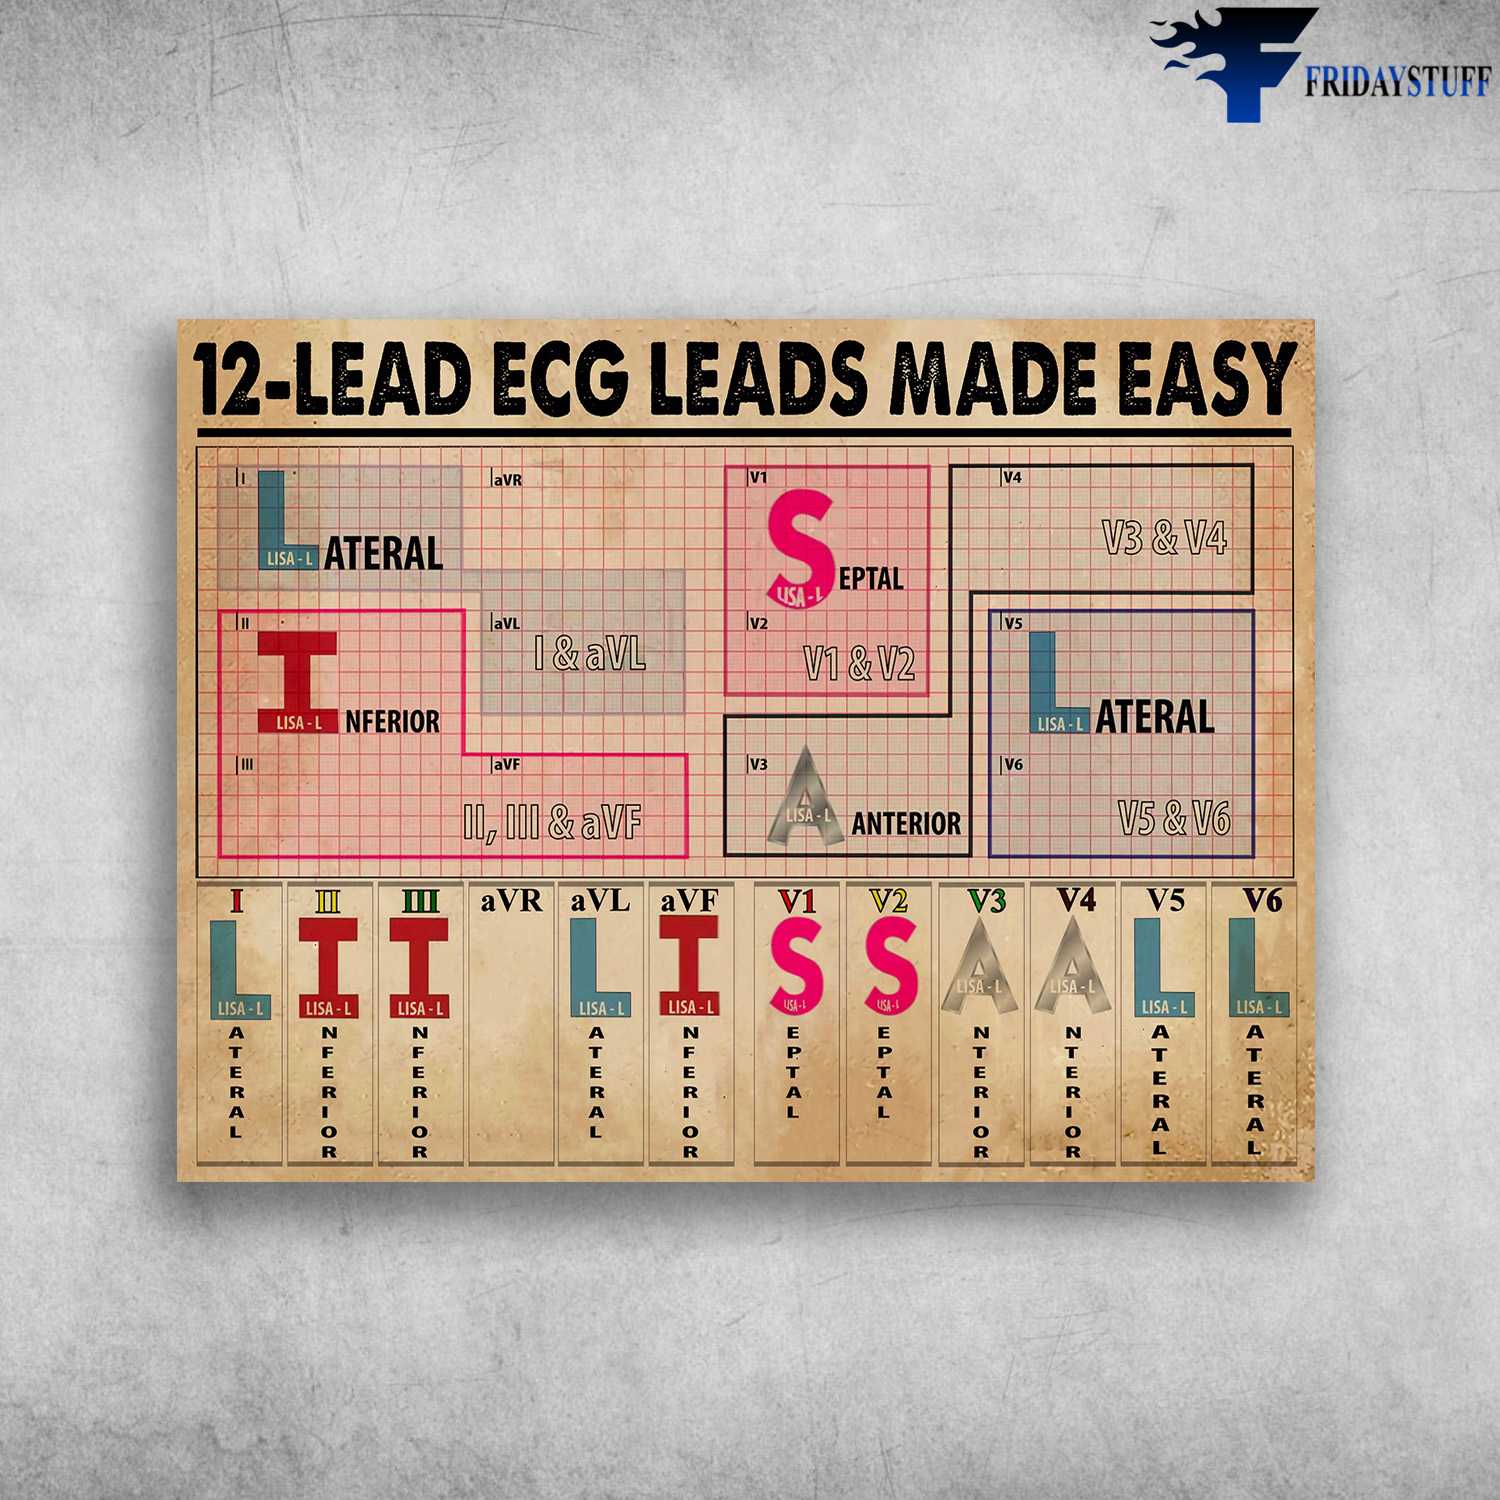 12-Lead Ecg Leads Made Easy, Lateral, Septal, Inferior, Anterior, Lateral